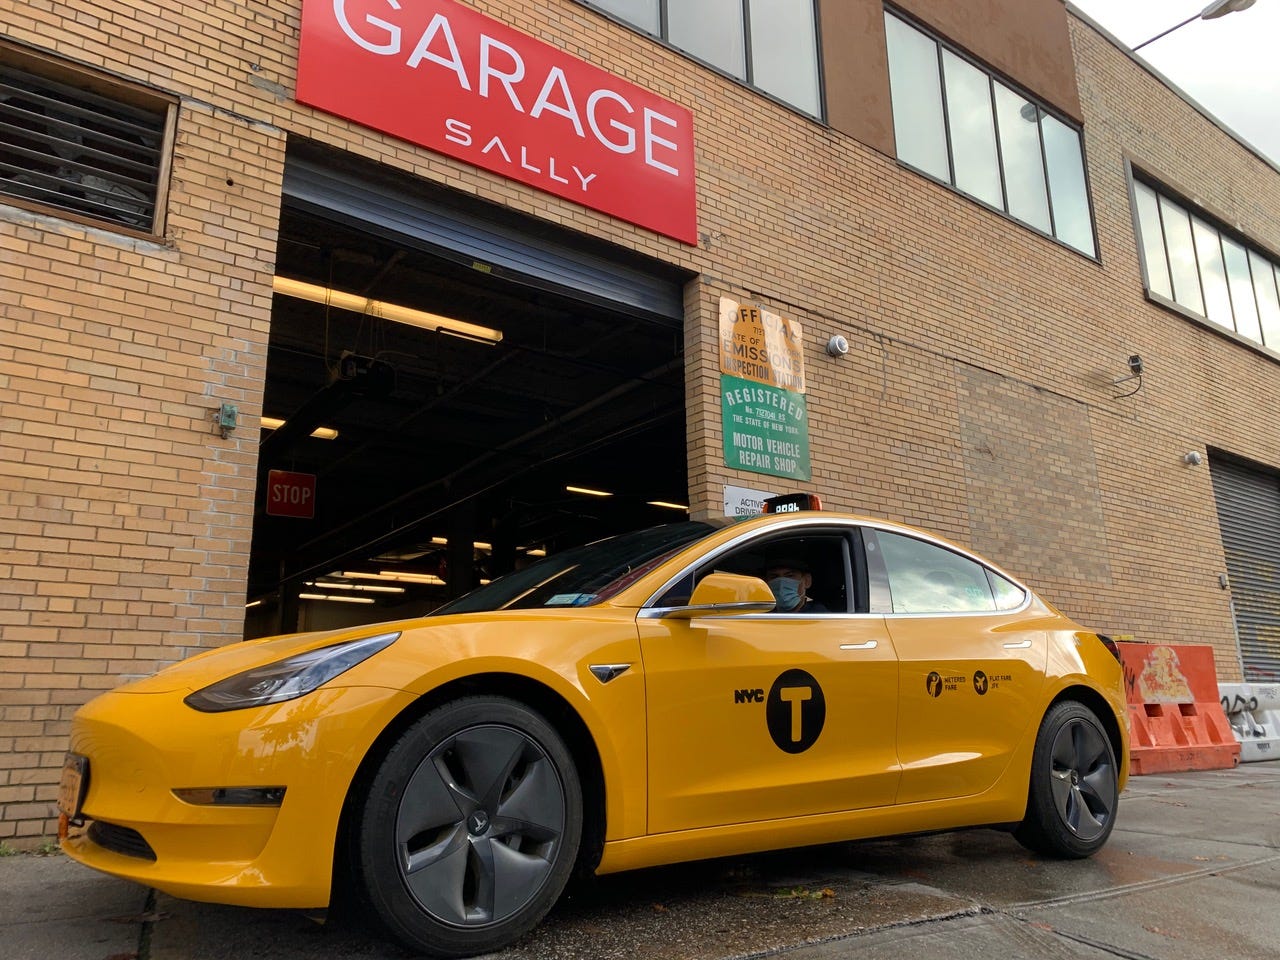 The first Tesla taxi in NYC just hit the streets as the city’s only electric yellow cab. The plan is for hundreds more to join it